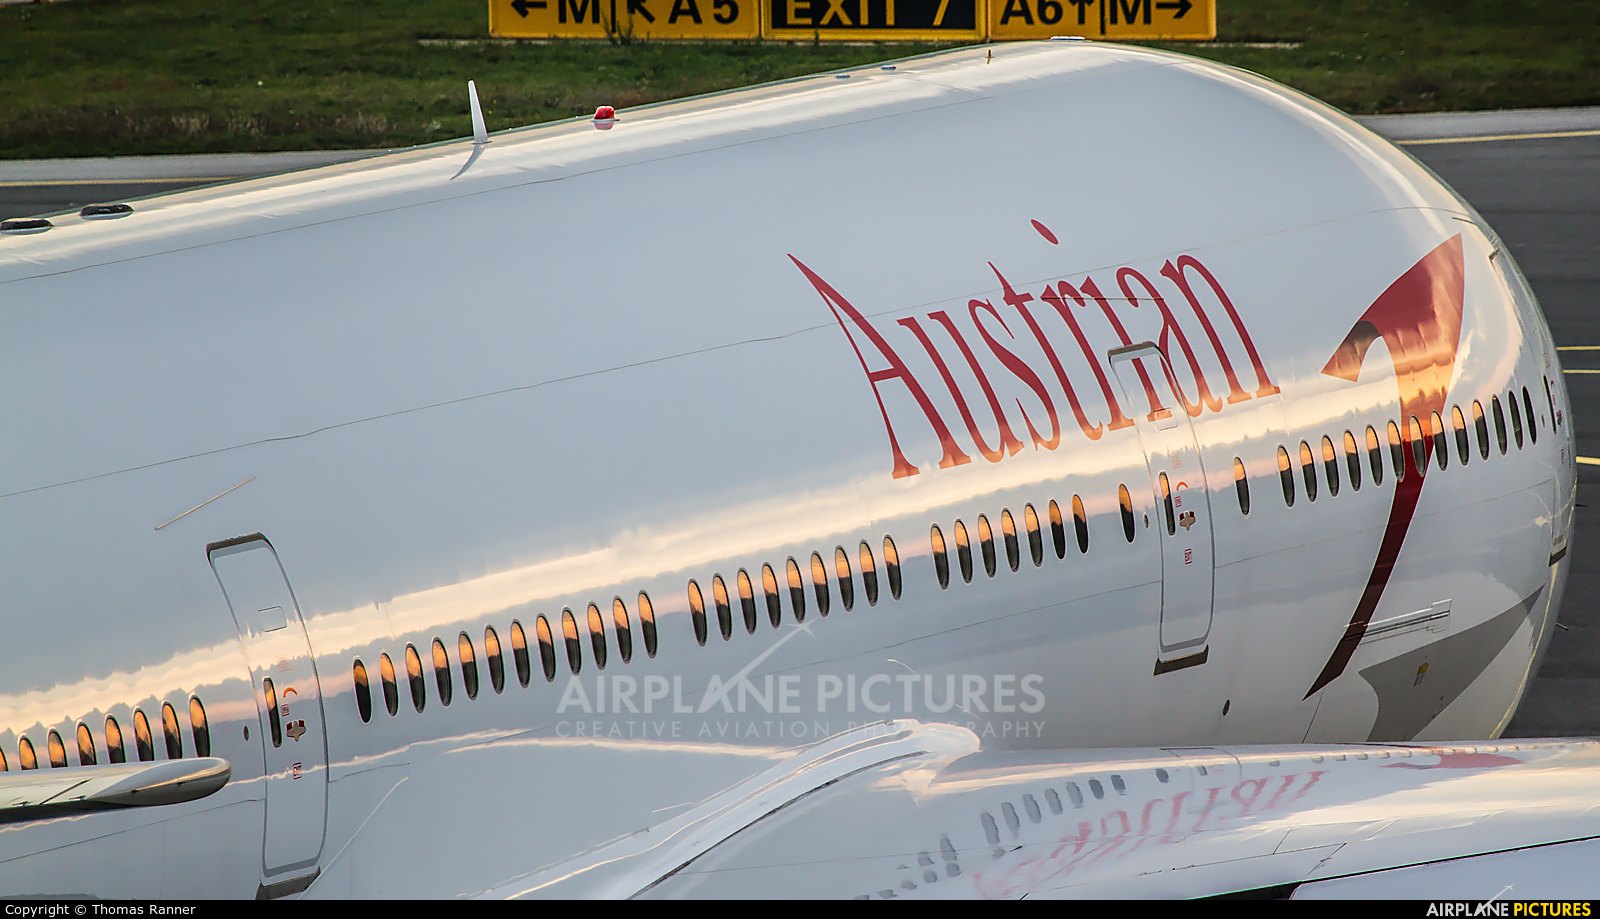 Austrian Airlines/Arrows/Tyrolean OE-LPE aircraft at Vienna - Schwechat